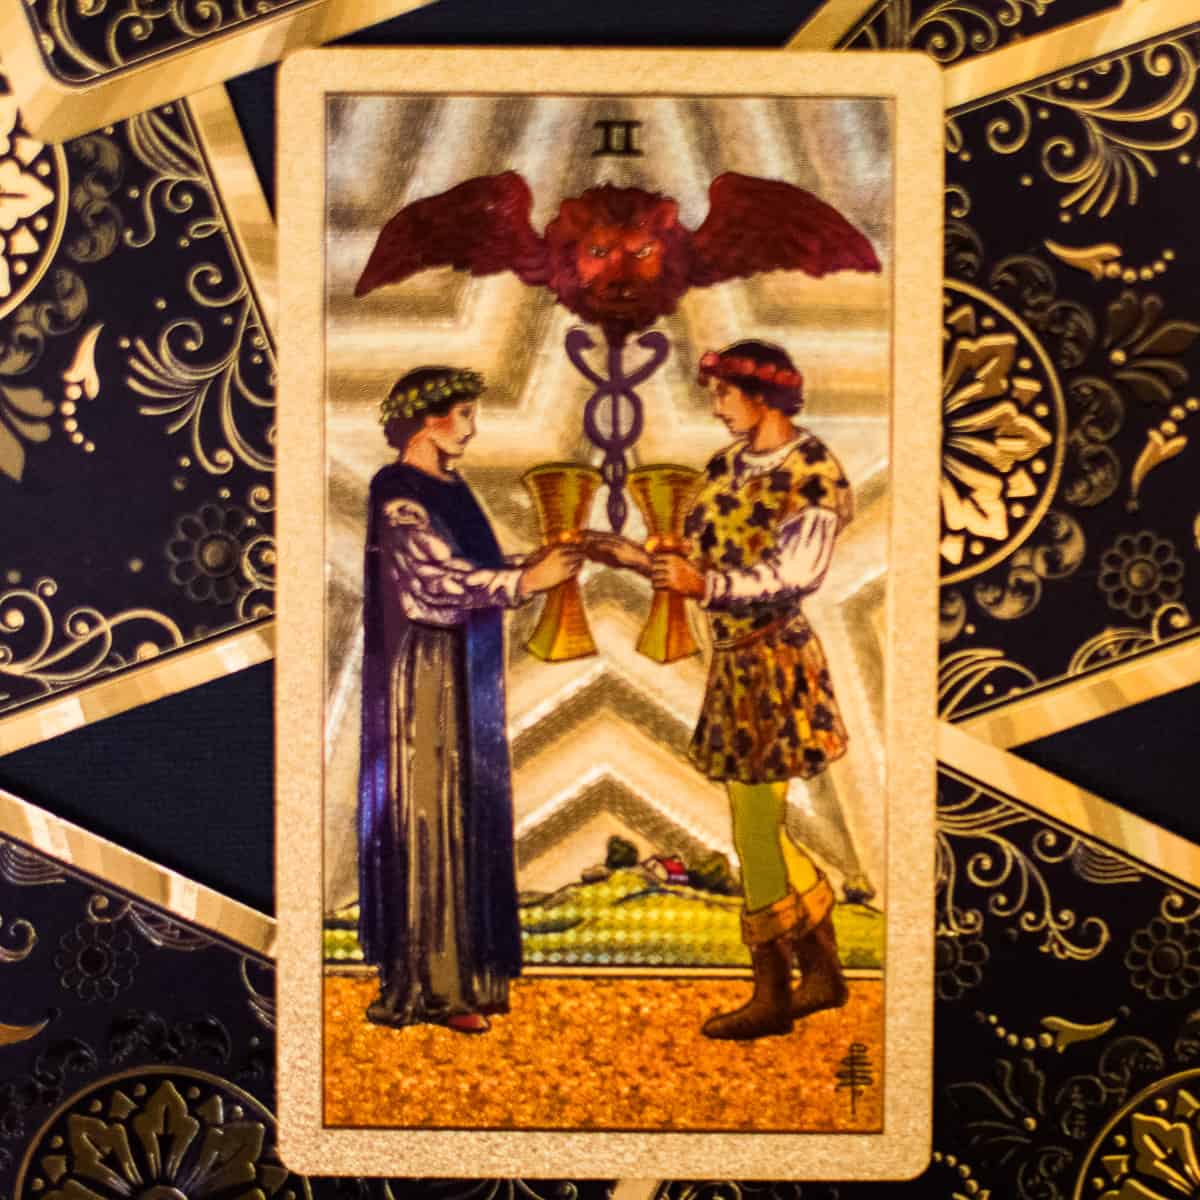 A man and woman exchanging gold cups depicted on a tarot card.